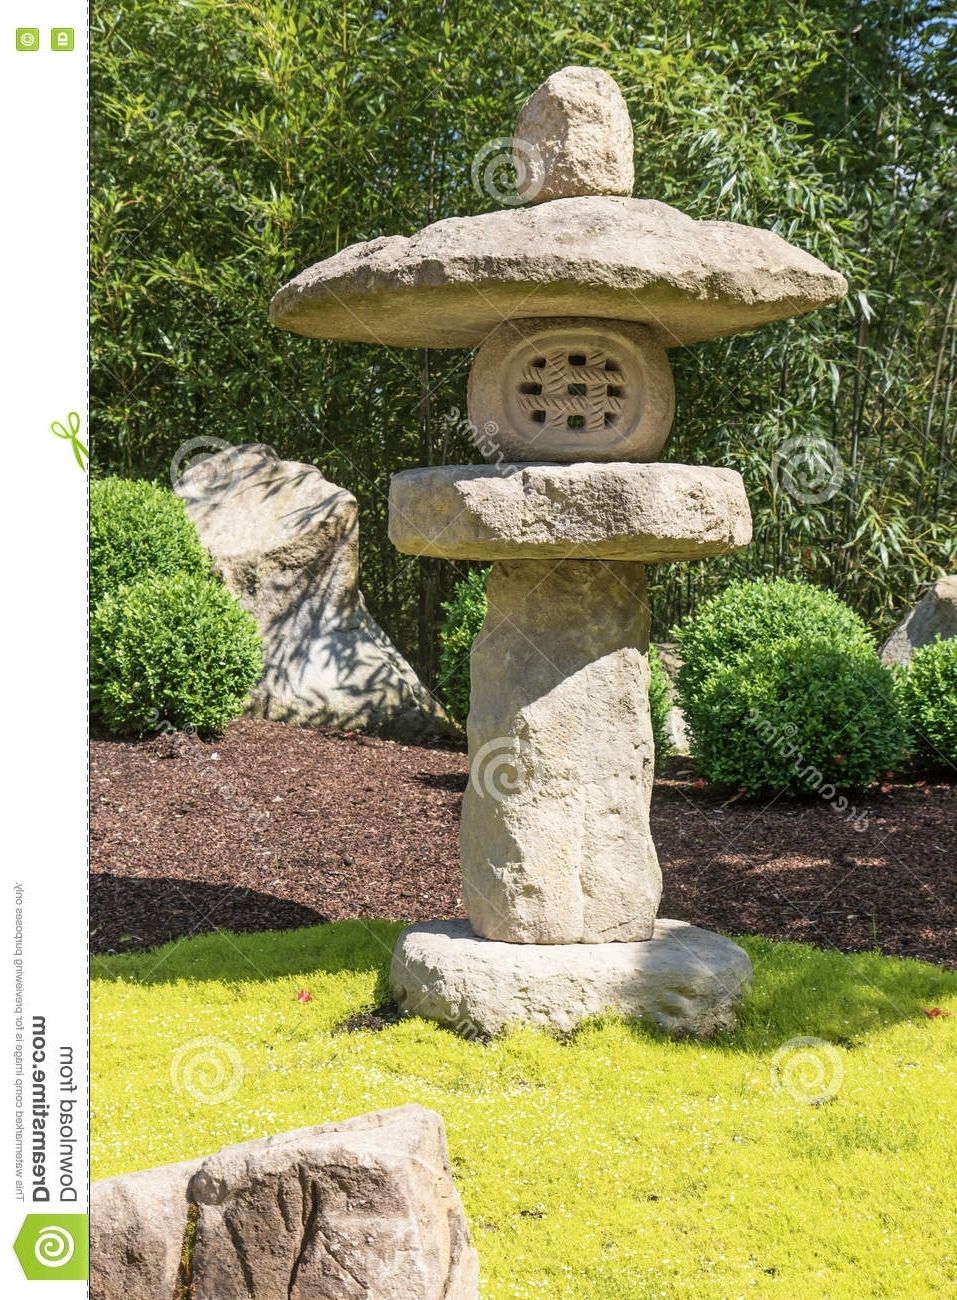 Widely Used Japanese Stone Garden Sculpture Outdoor Lanterns For Sale Gardens Intended For Outdoor Japanese Lanterns For Sale (View 13 of 20)